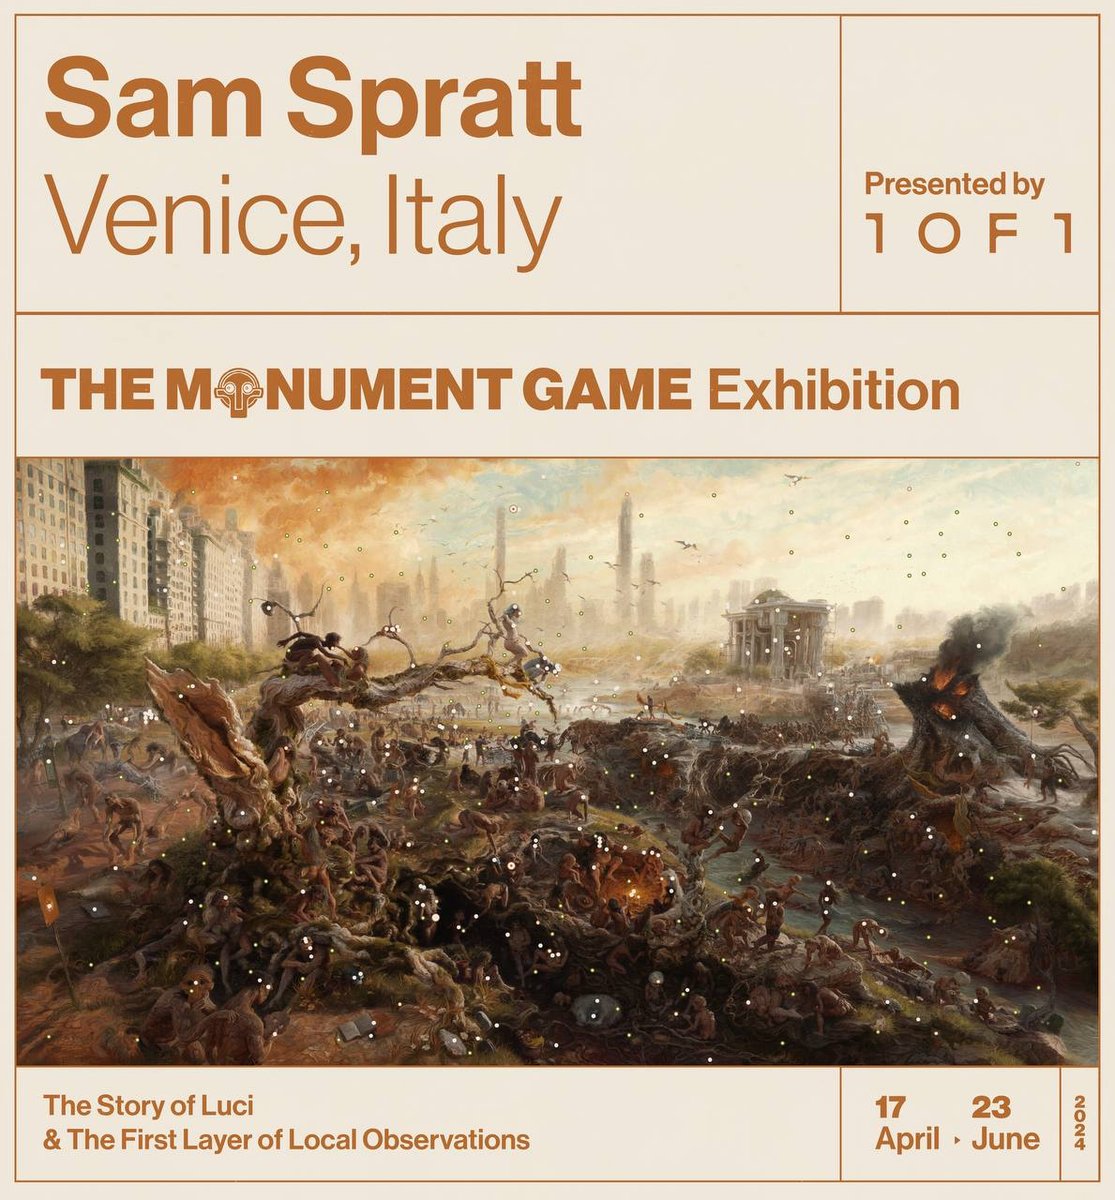 Announcing @SamSpratt's debut solo exhibition The Monument Game in Venice, Italy. Experience the story of Luci at an unprecedented scale and leave your mark on the first layer of local observations in a breathtaking environment. April 17th - June 23rd